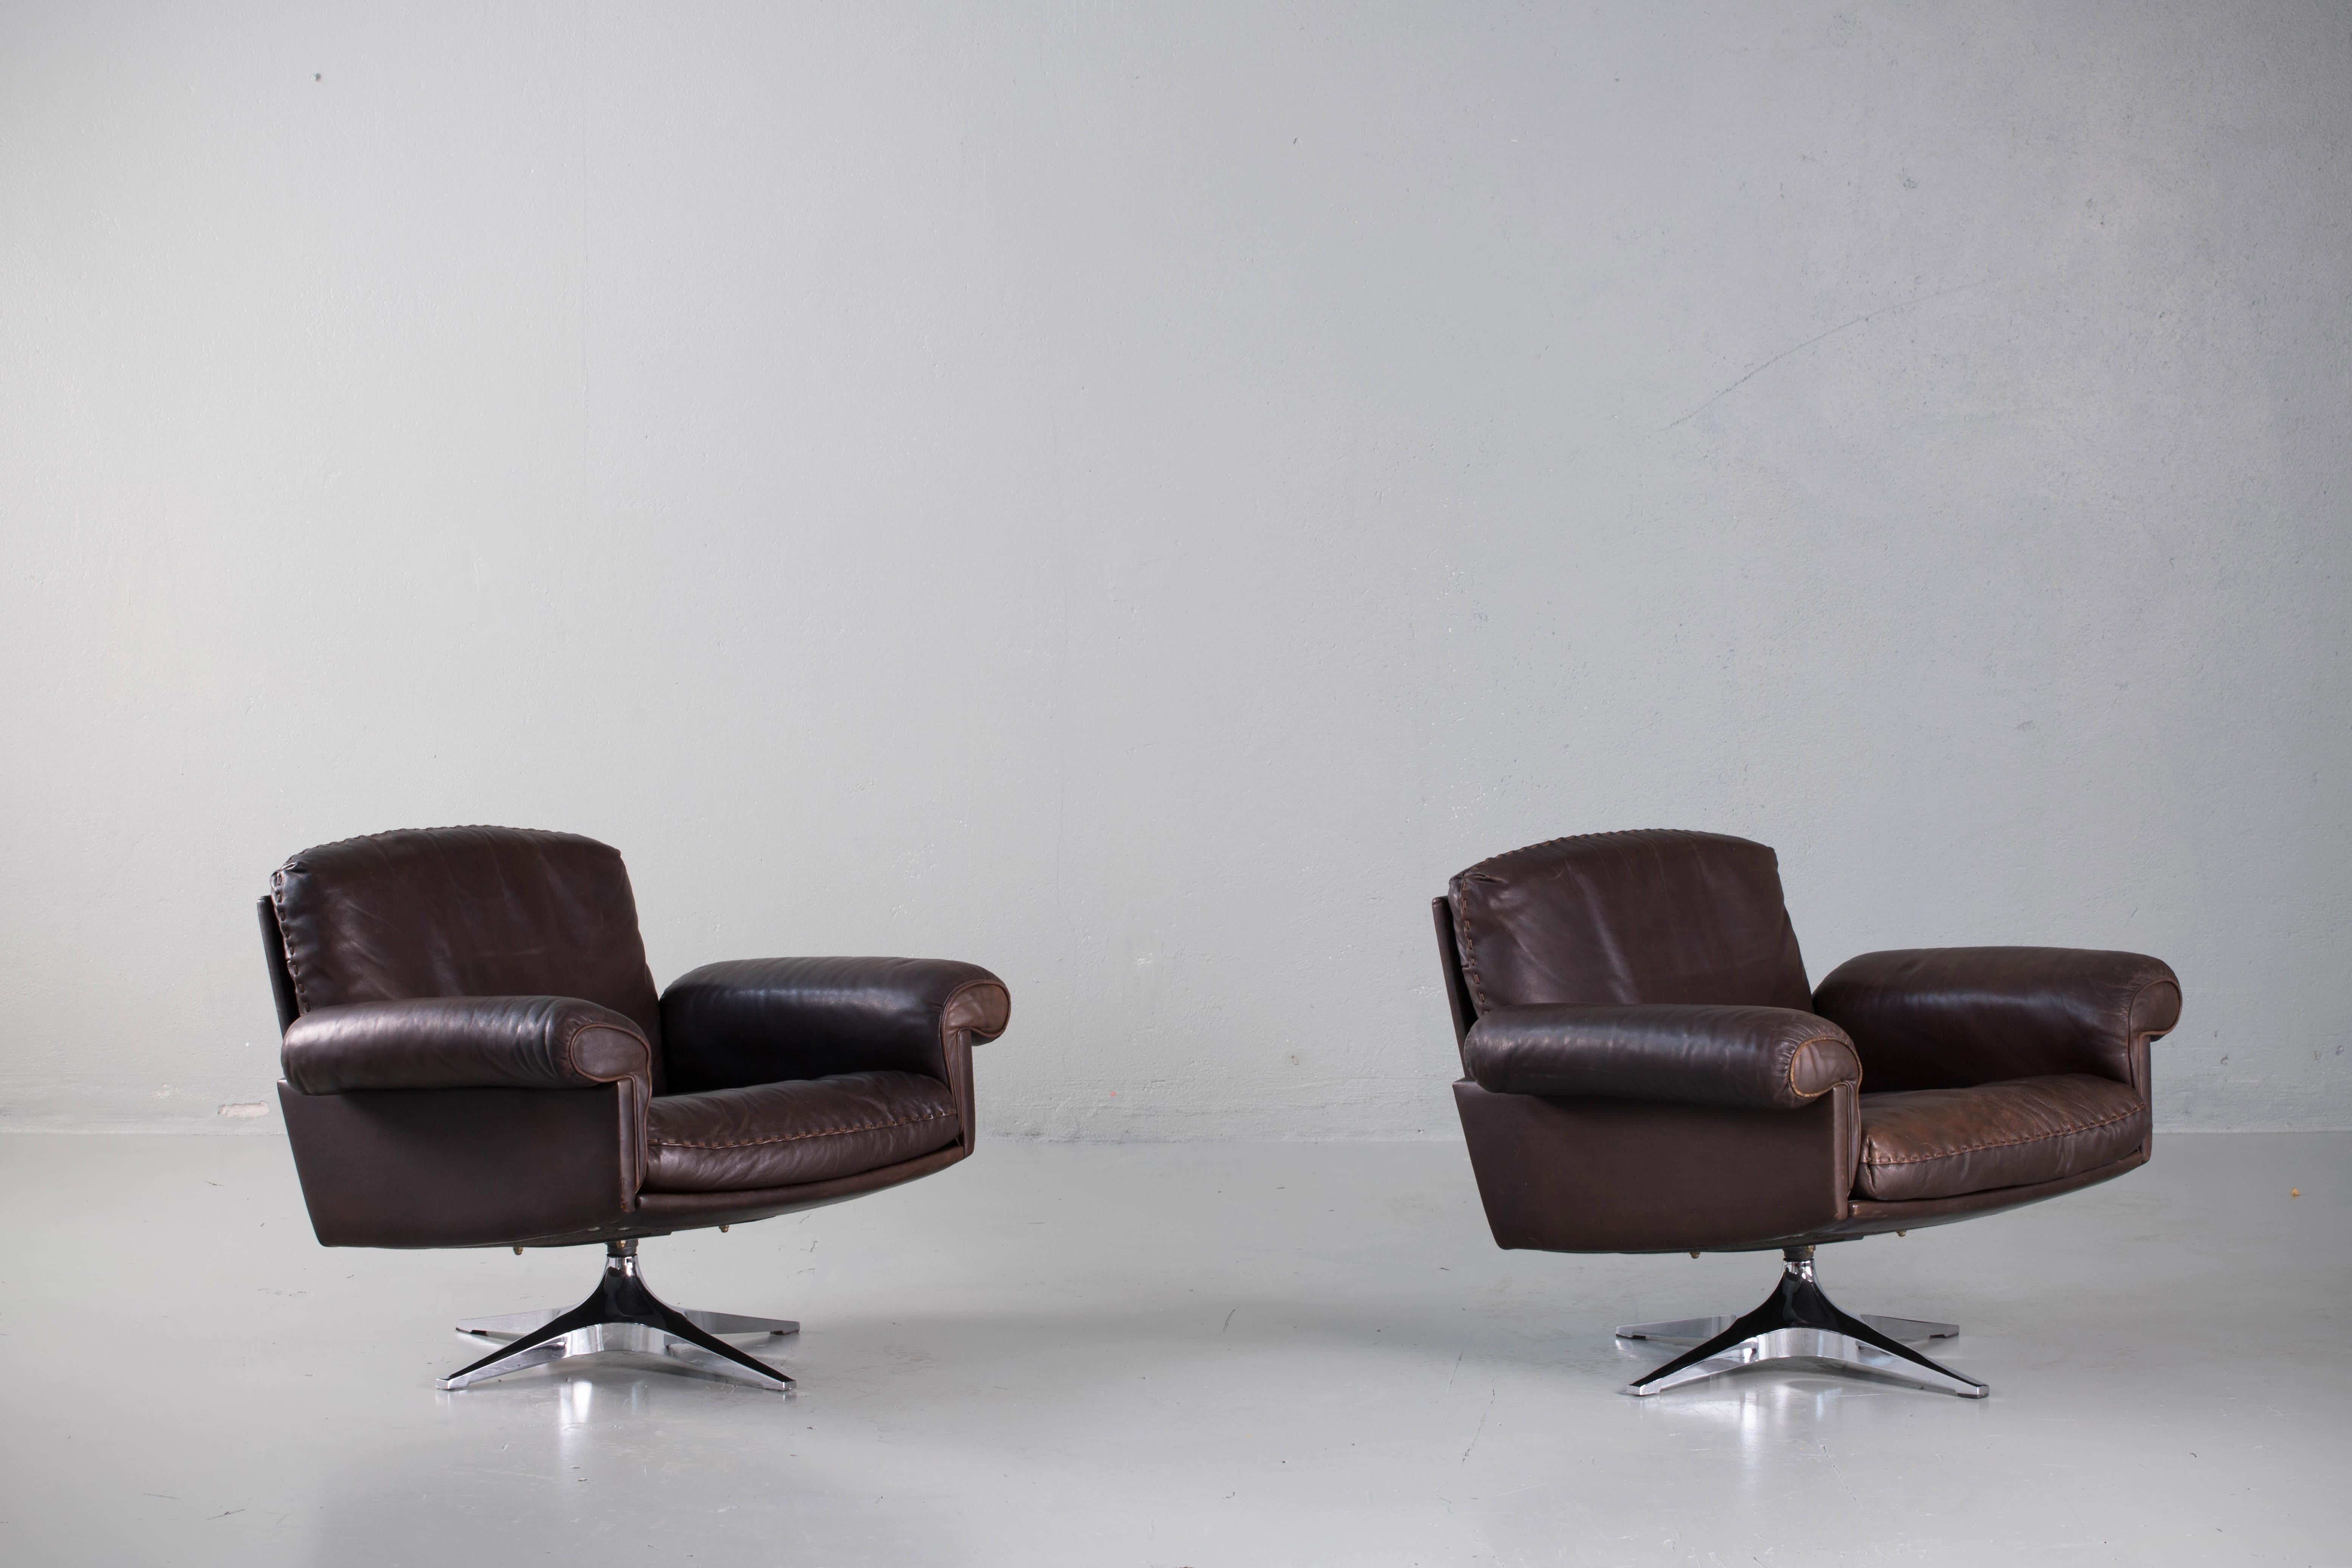 Pair of swivel armchairs model DS31 from the Swiss luxury manufacturer De Sede, Switzerland, 1970s.
The set consists of a three-seat sofa and 2 matching in brown patinated aniline leather.
Stunning cognac aniline leather with whipstitch edge